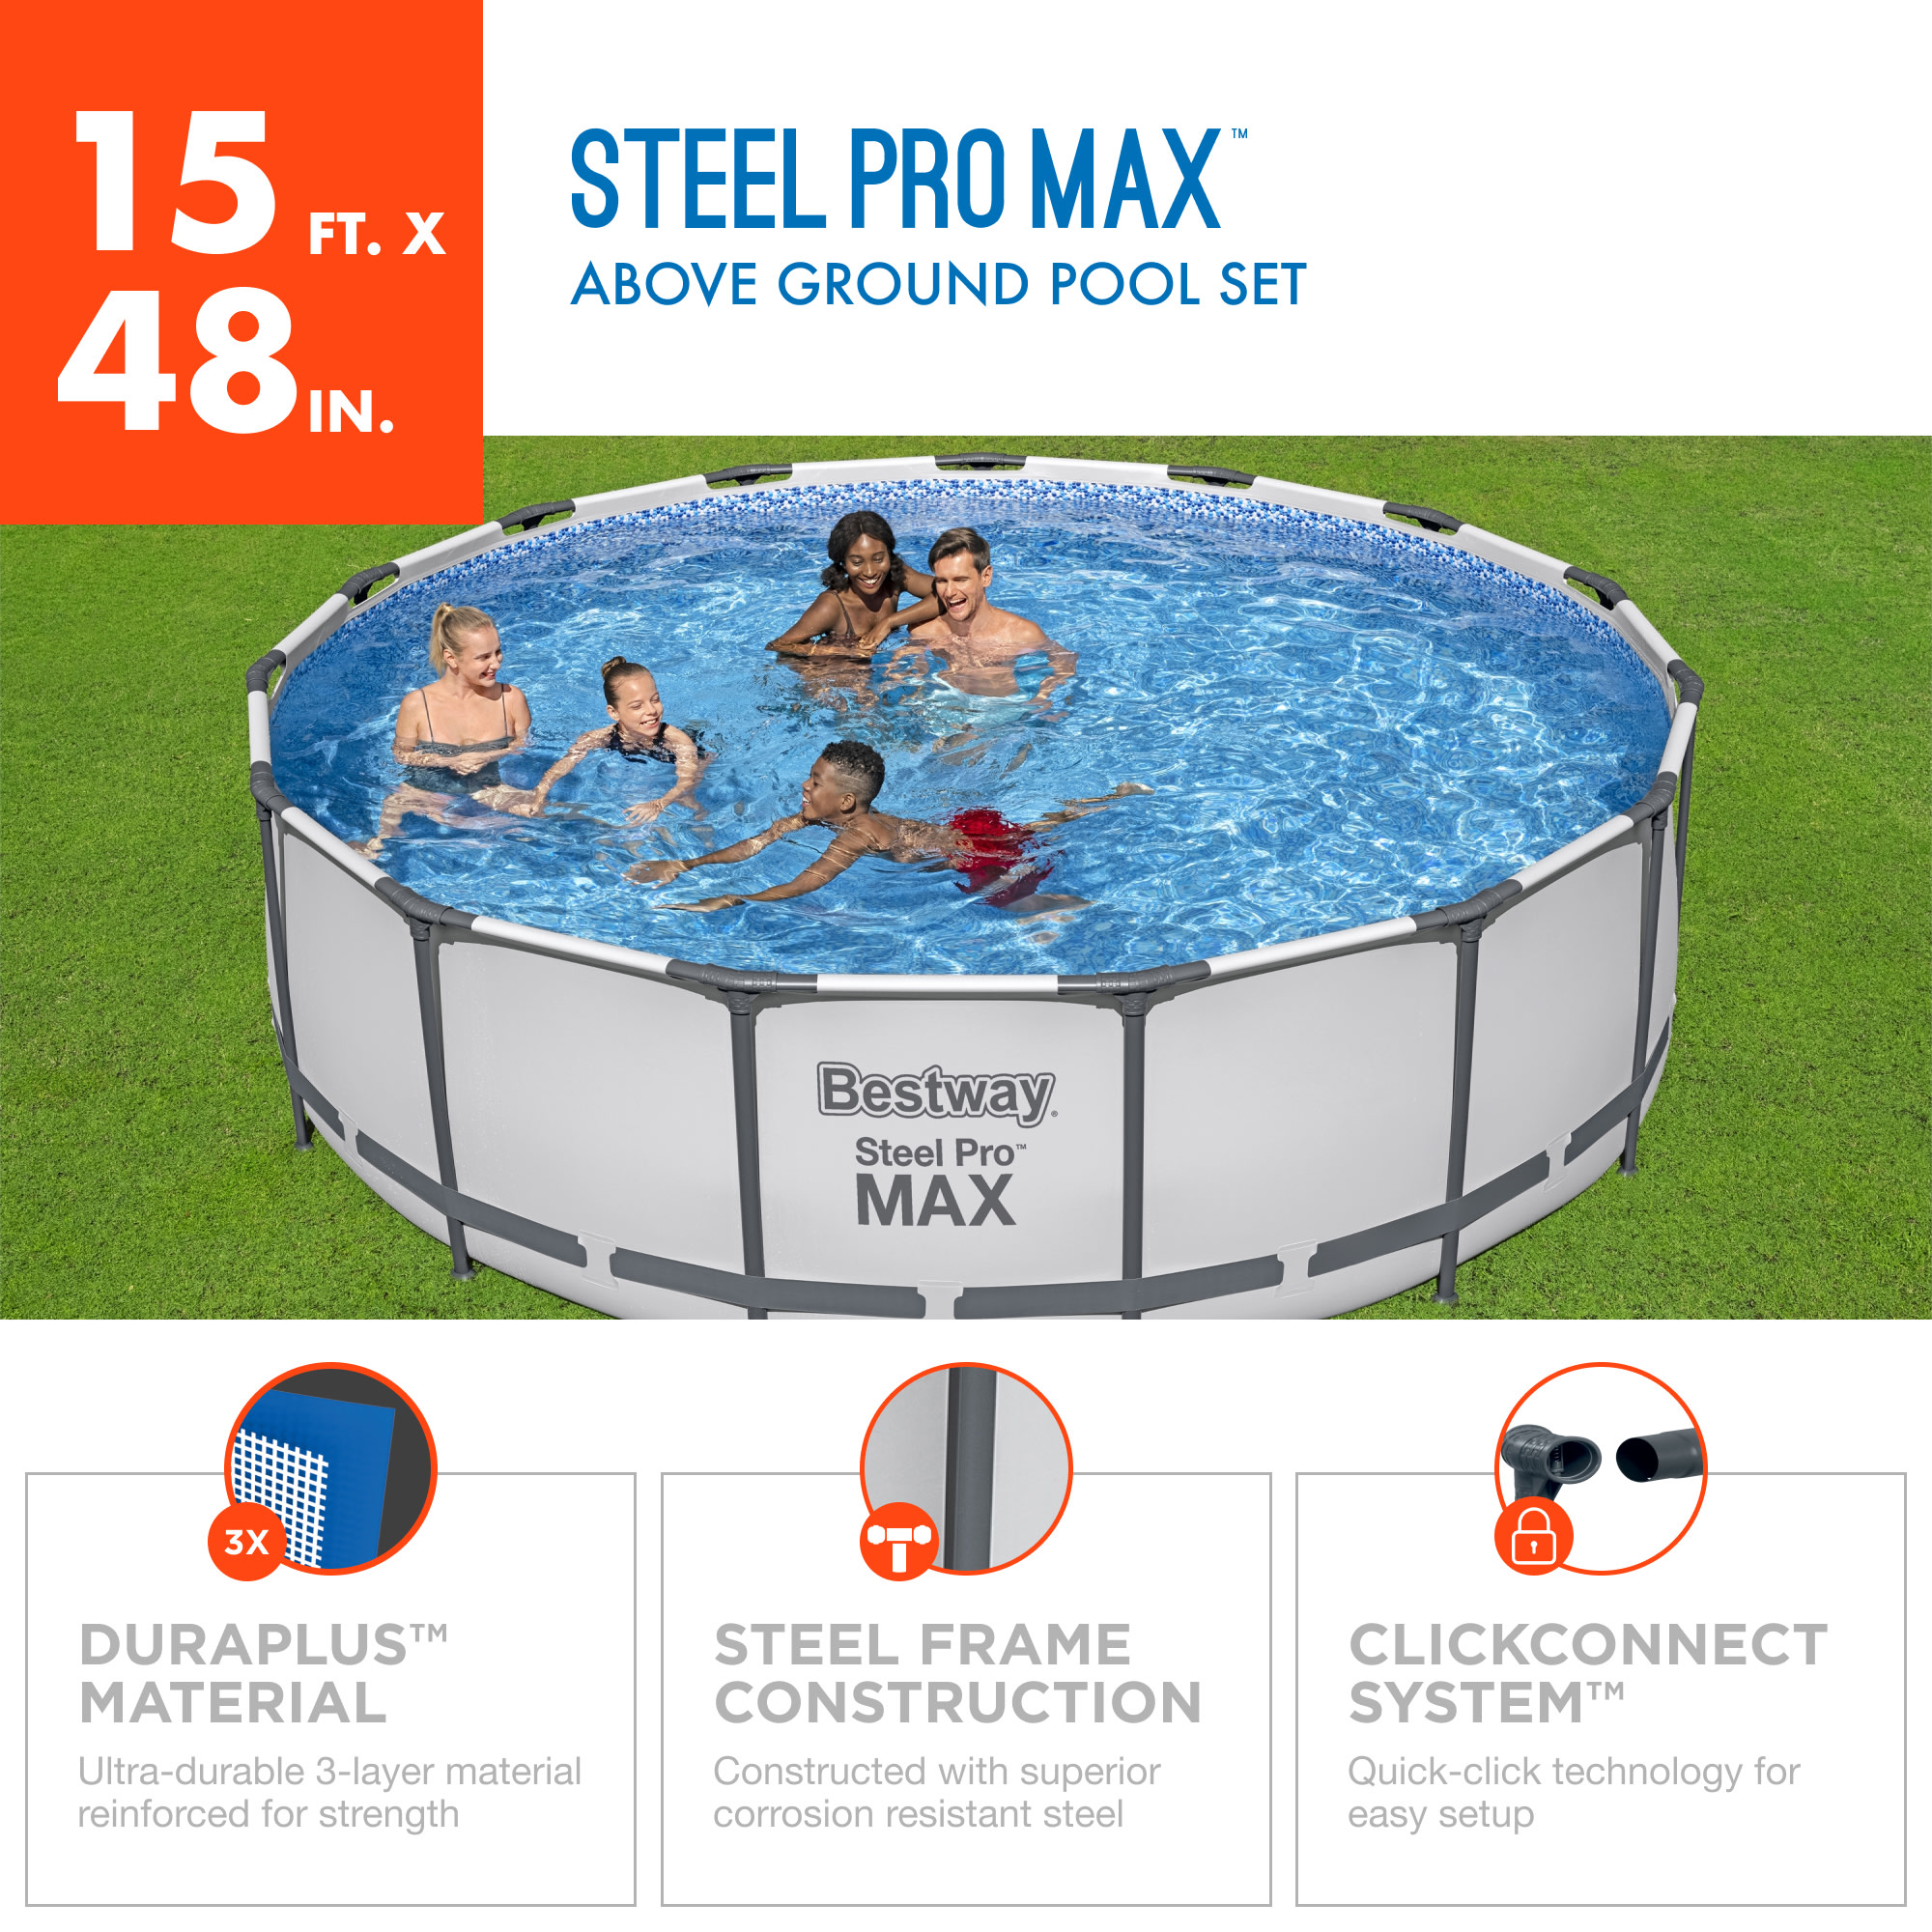 Steel Pro MAX 15' x 48" Prismatic Stone Above Ground Pool Set - image 3 of 6